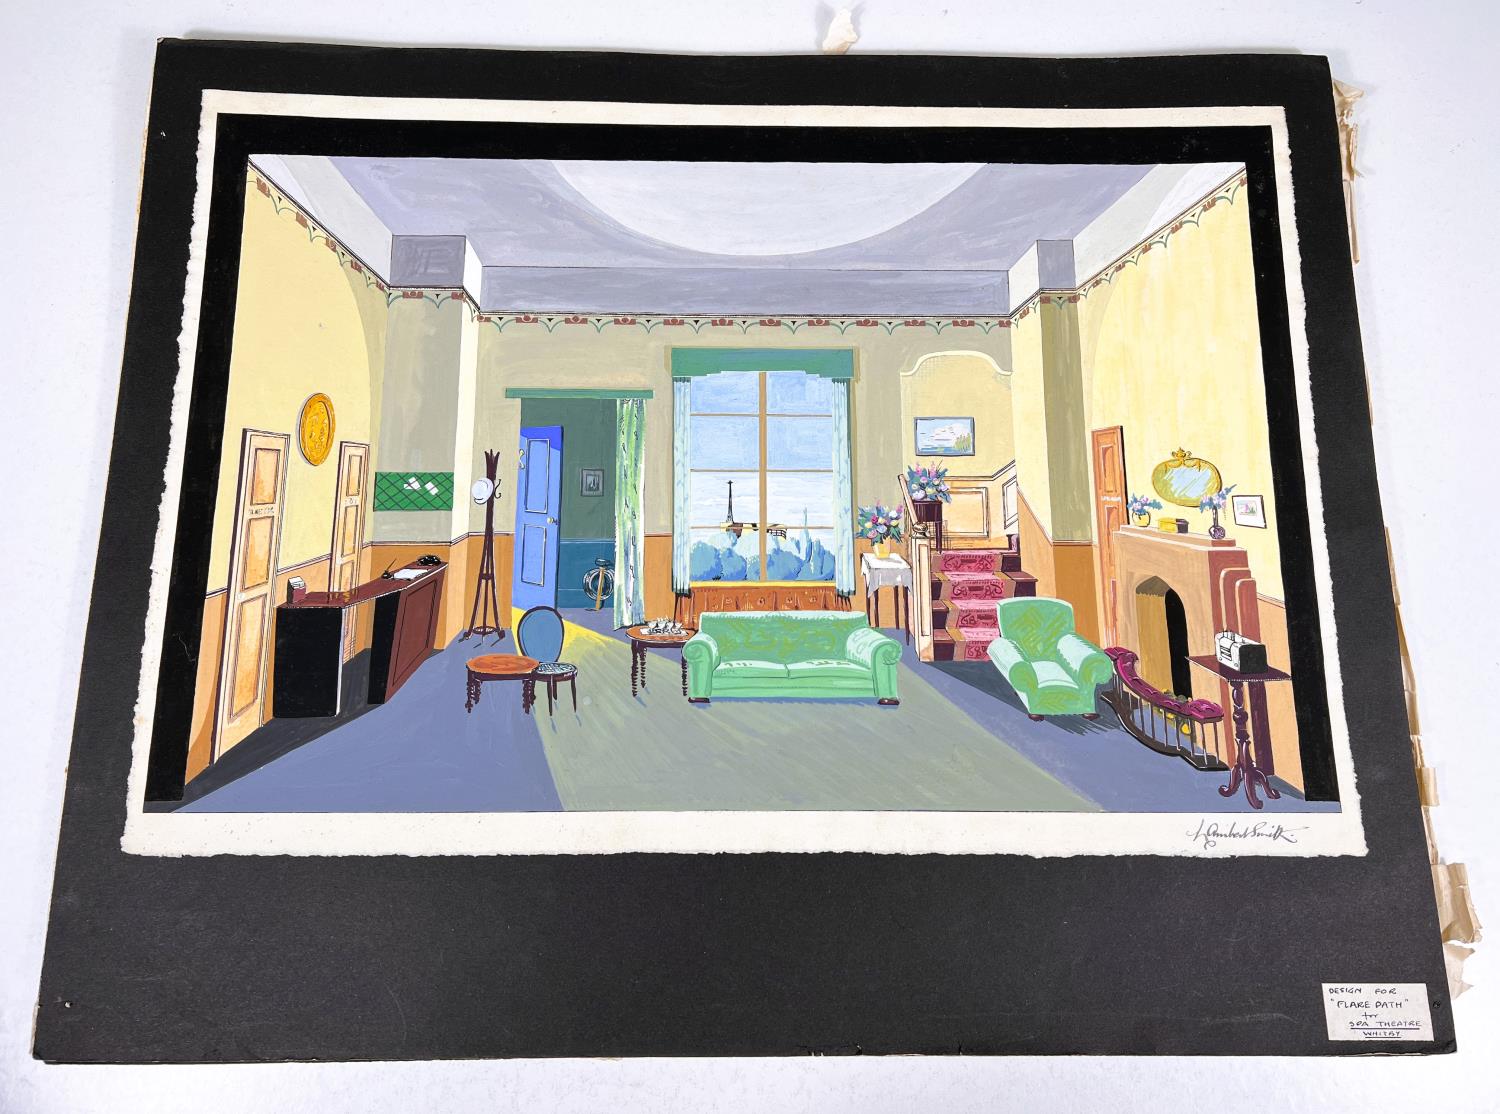 LAMBERT SMITH (British 20th century) - gouache on paper , theatre set design for flare path (Terence